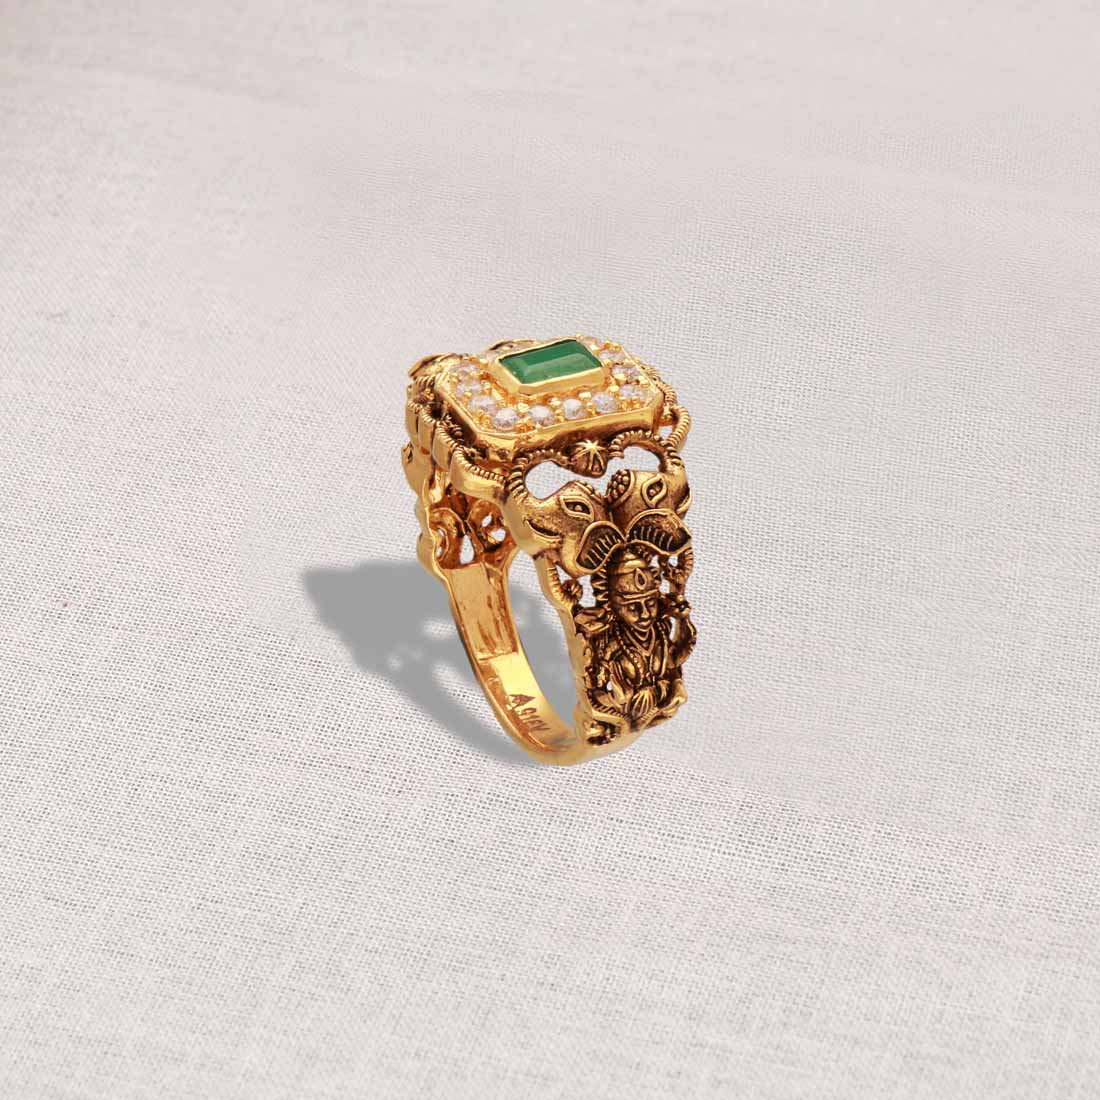 Brand Jewelry Vintage Antique Gold Color Crystal Ring For Men Stainless  Steel Big Square Stone Finger Ring Male Men Jewelry - Rings - AliExpress